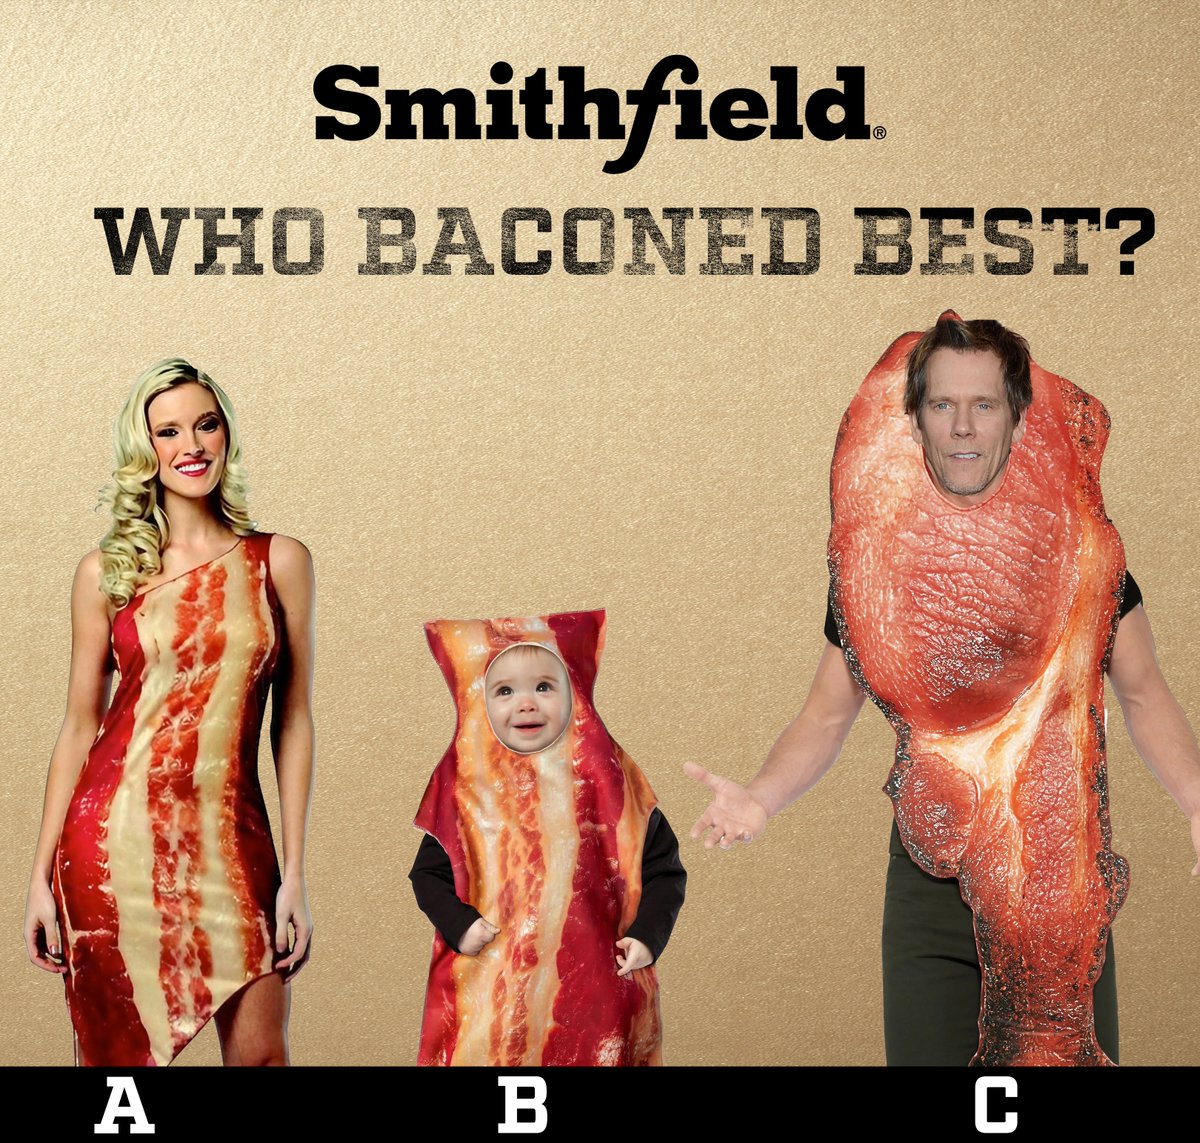 Eat bacon ✓ Dress like bacon ✓ Act like bacon ✓ Tell us who you think baconed best.